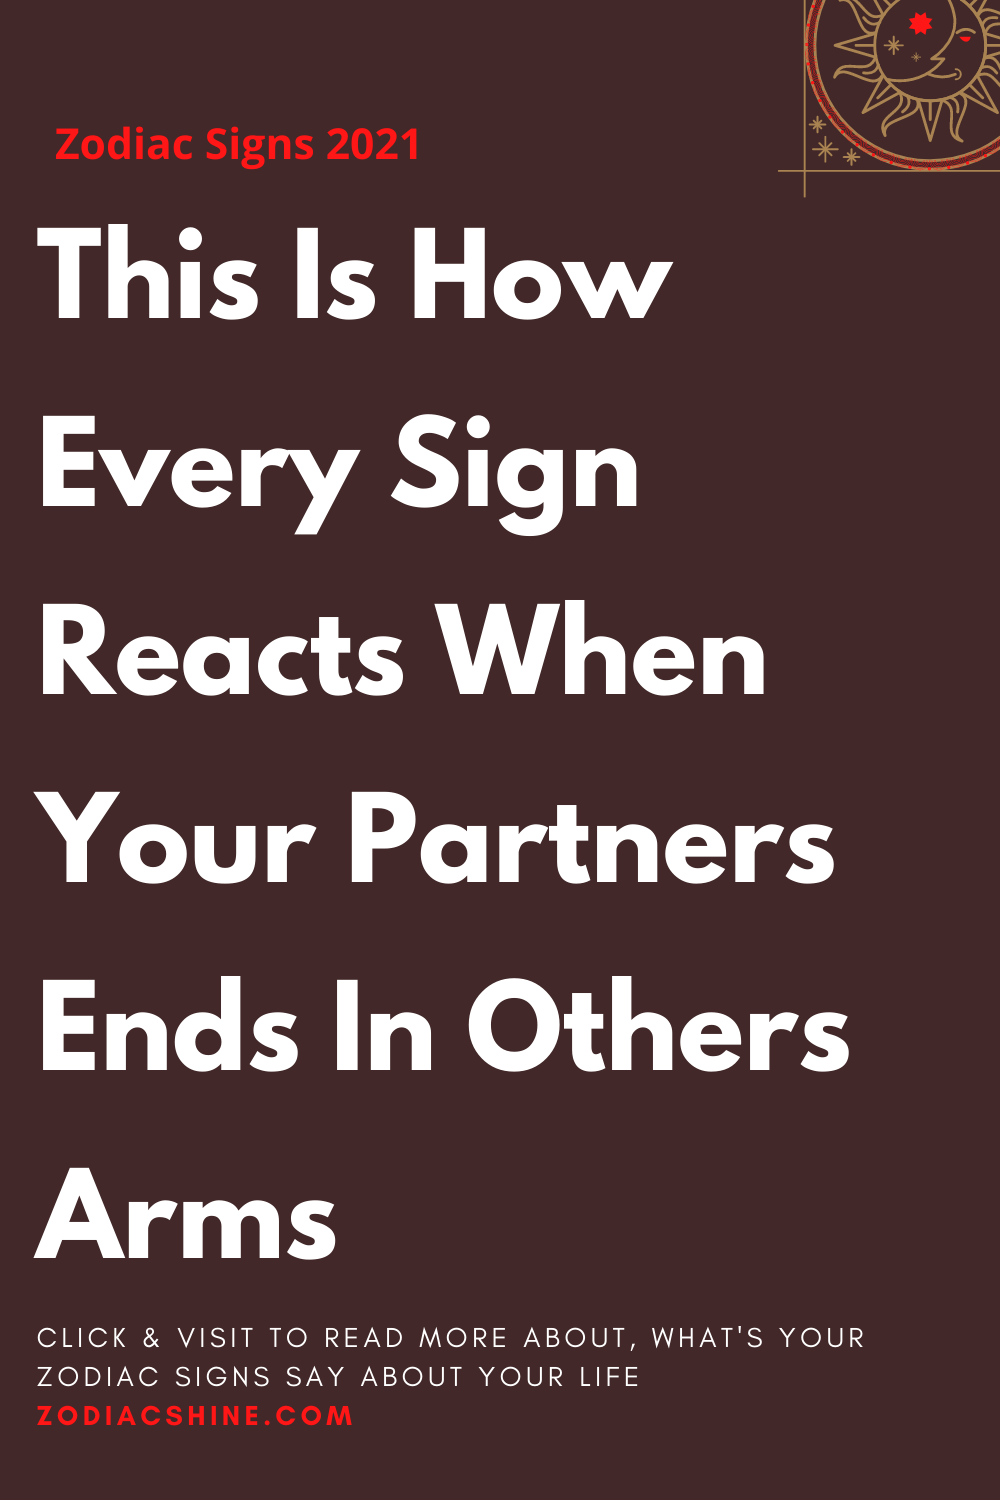 This Is How Every Sign Reacts When Your Partners Ends In Others Arms